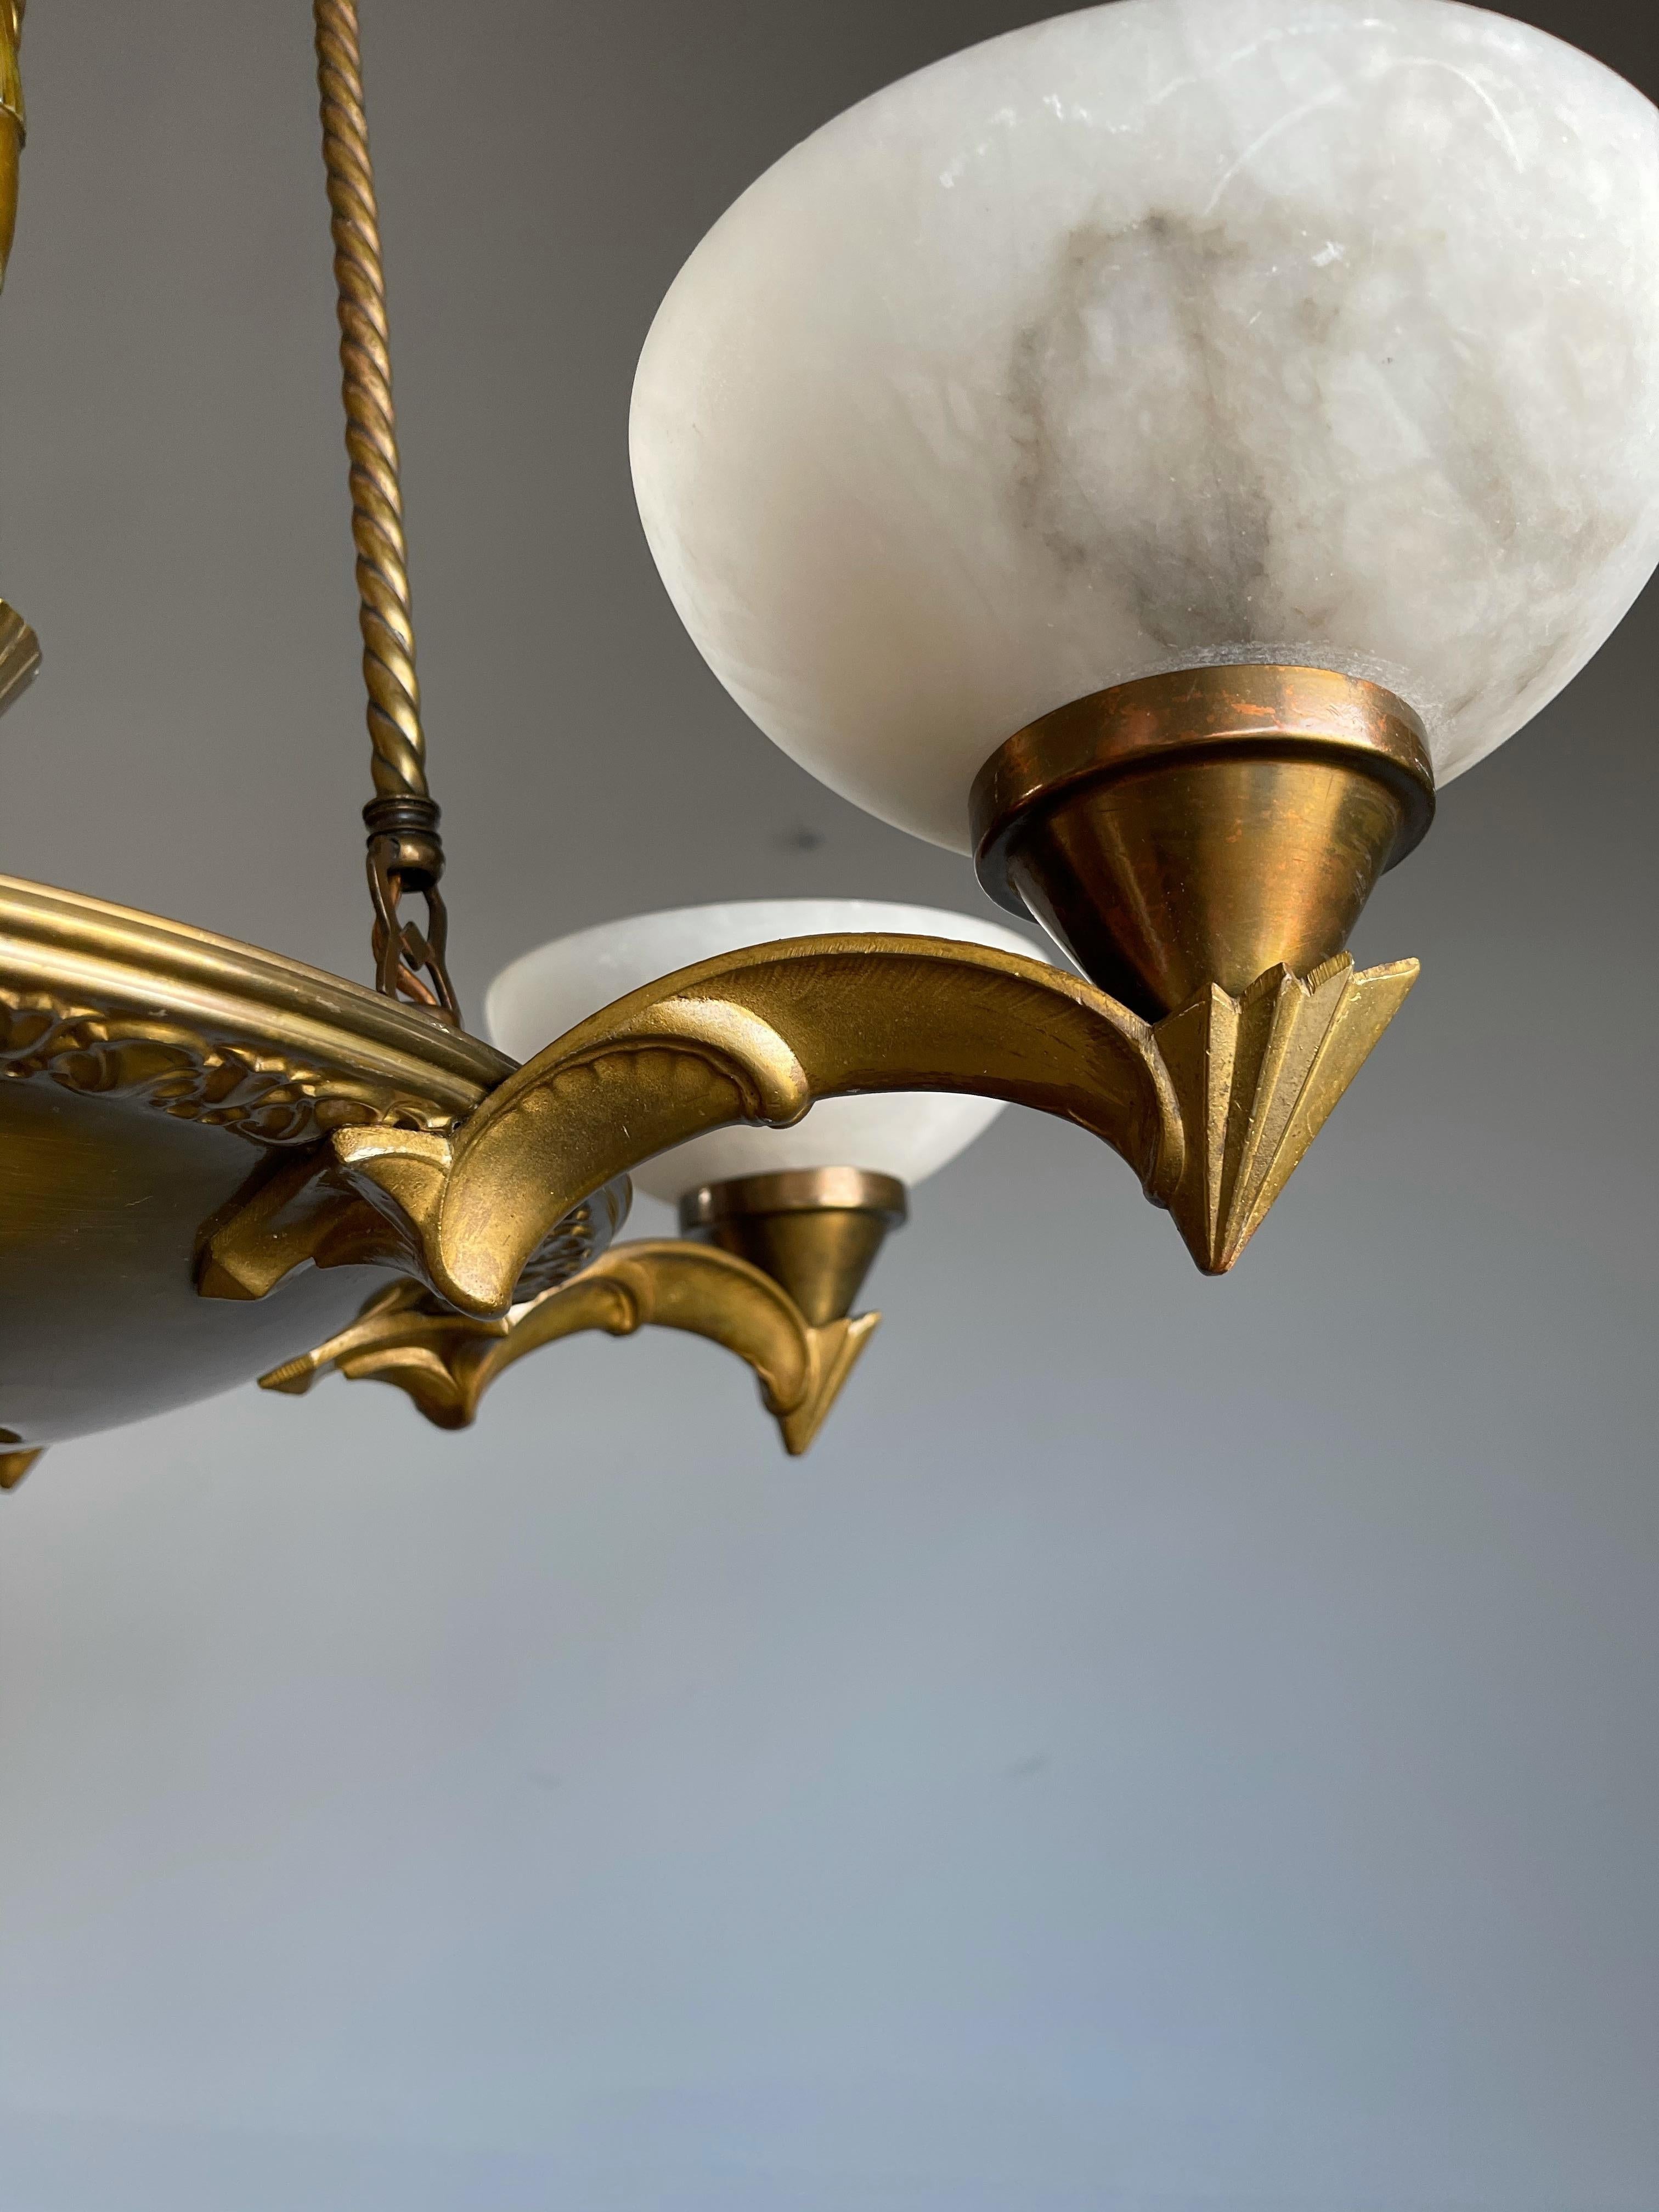 Pure and Stylish Art Deco Sculpture Chandelier w Stunning Alabaster Shades 1920s For Sale 3